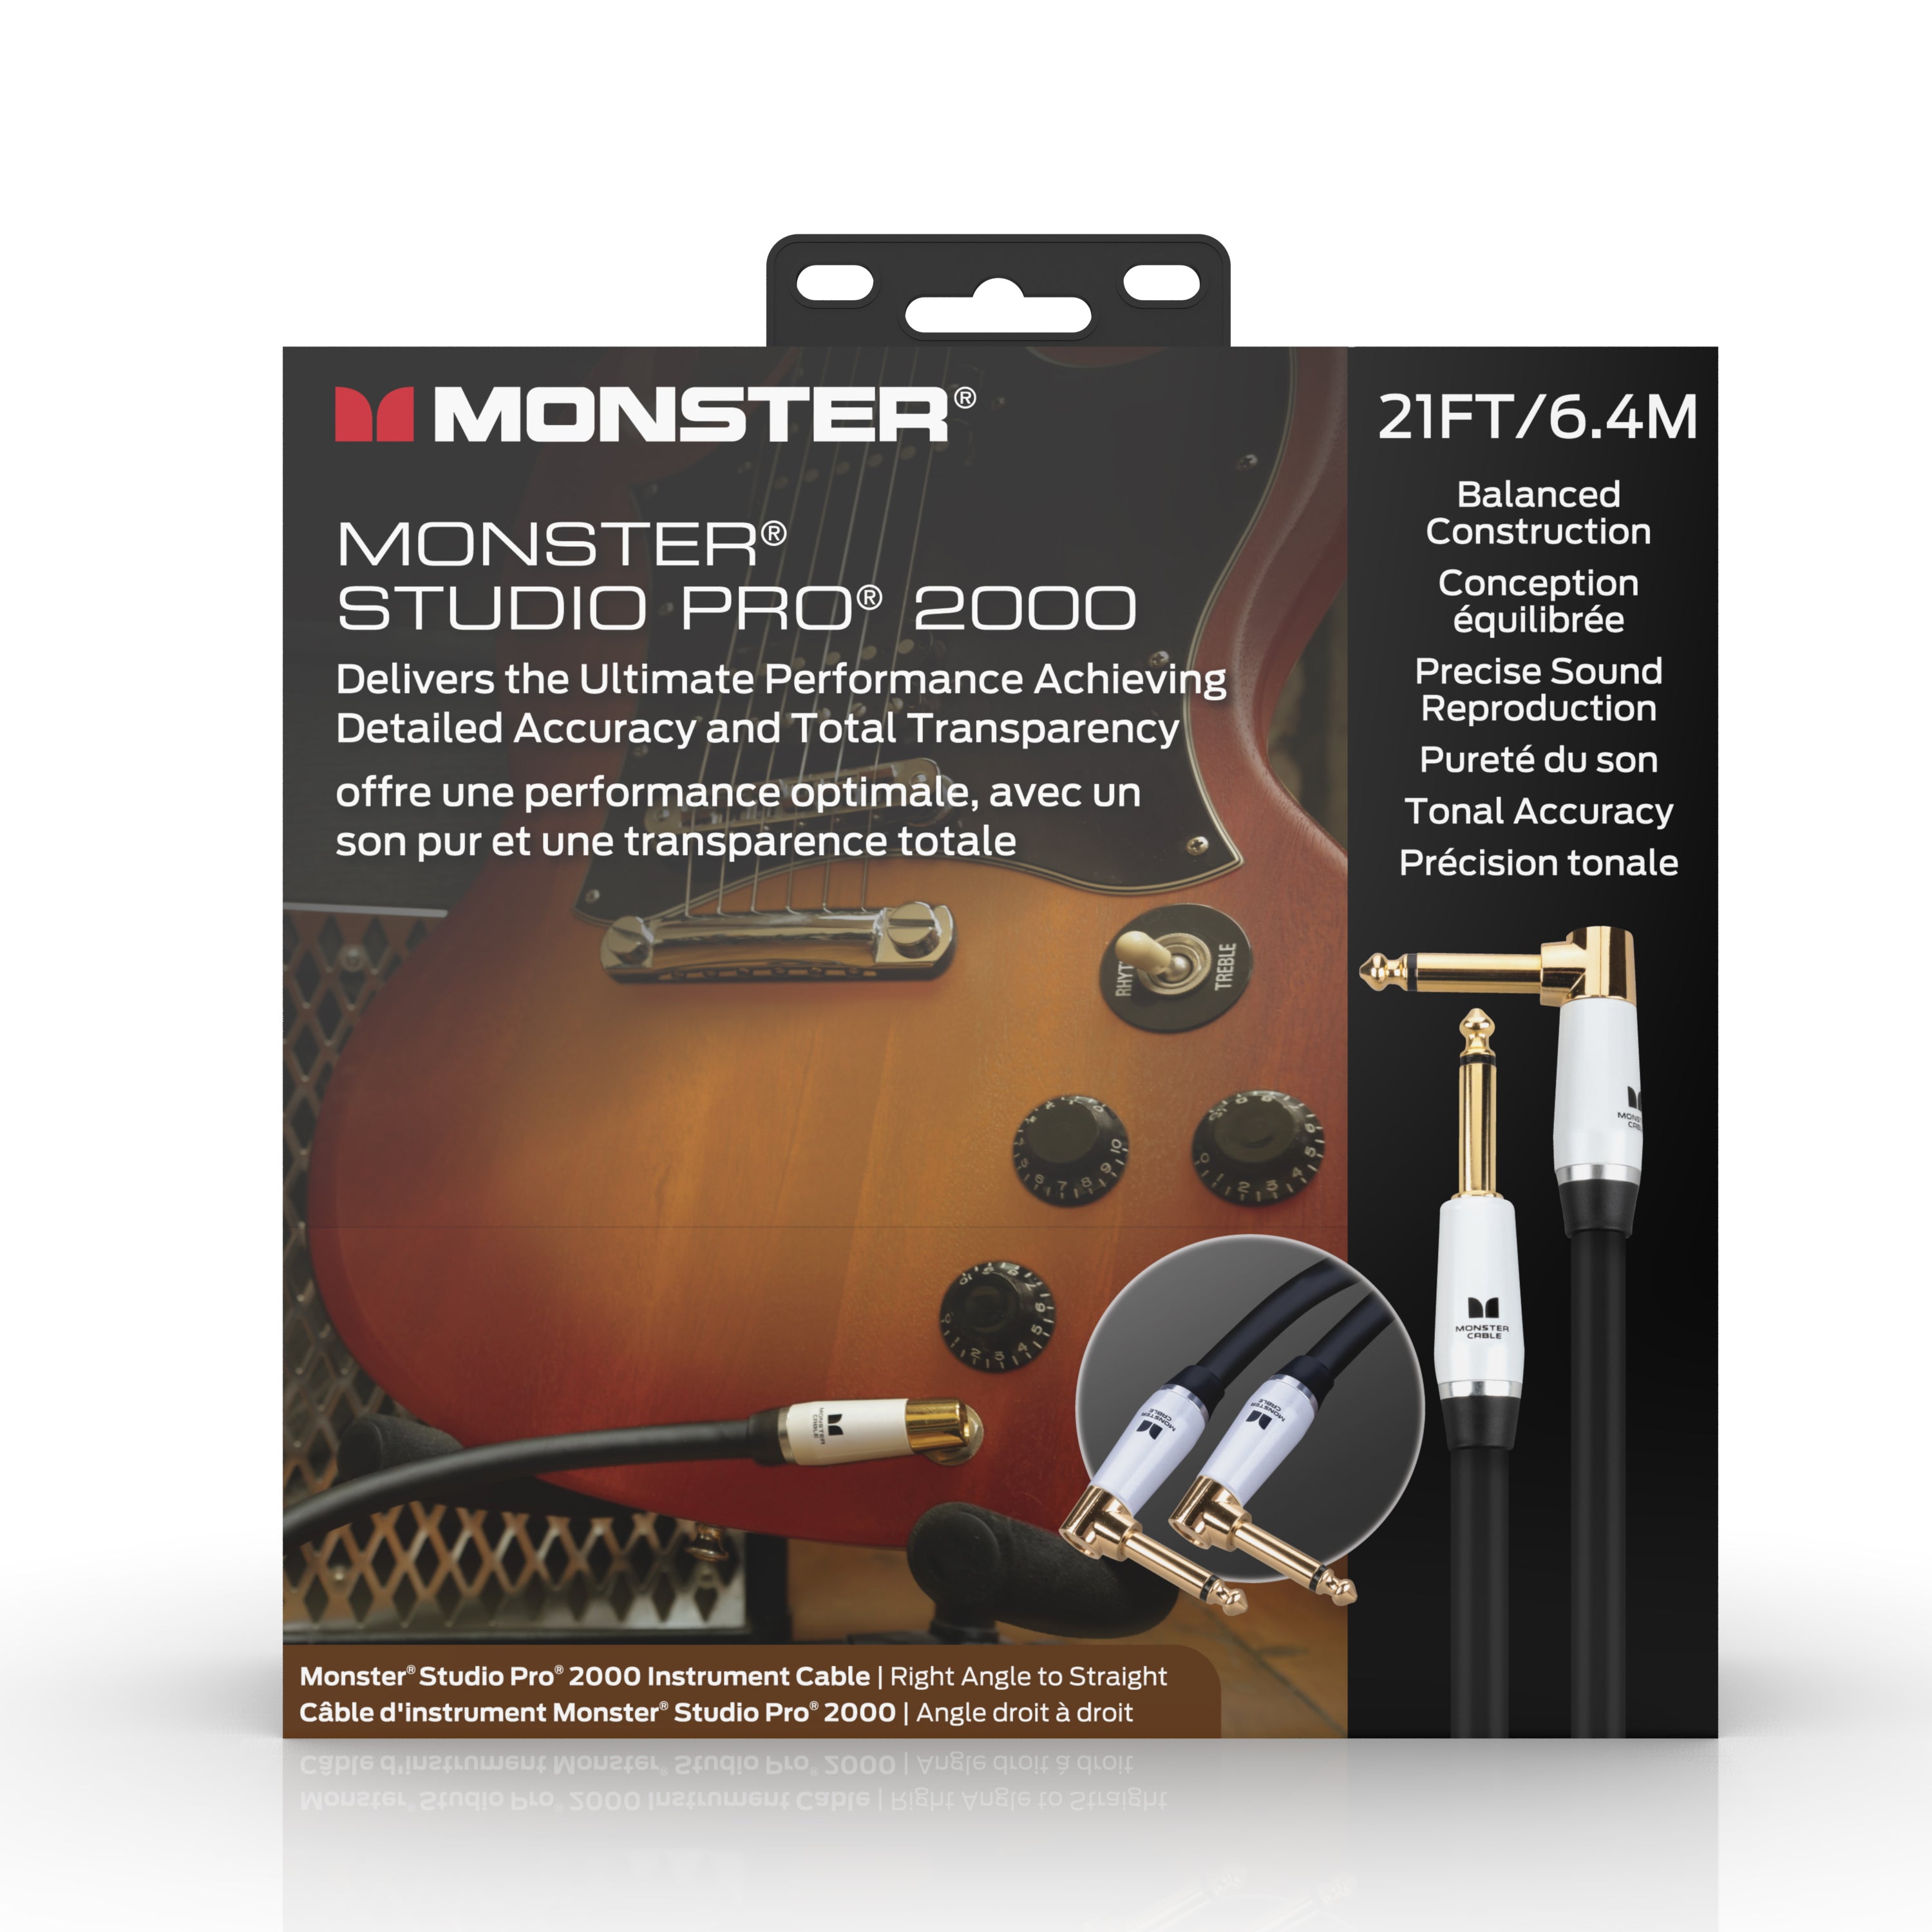 Monster® Prolink Studio Pro 2000 Instrument Cable - HIENDGUITAR Straight-Angle / 21ft(6.4m) Straight-Angle Monstercable Cables